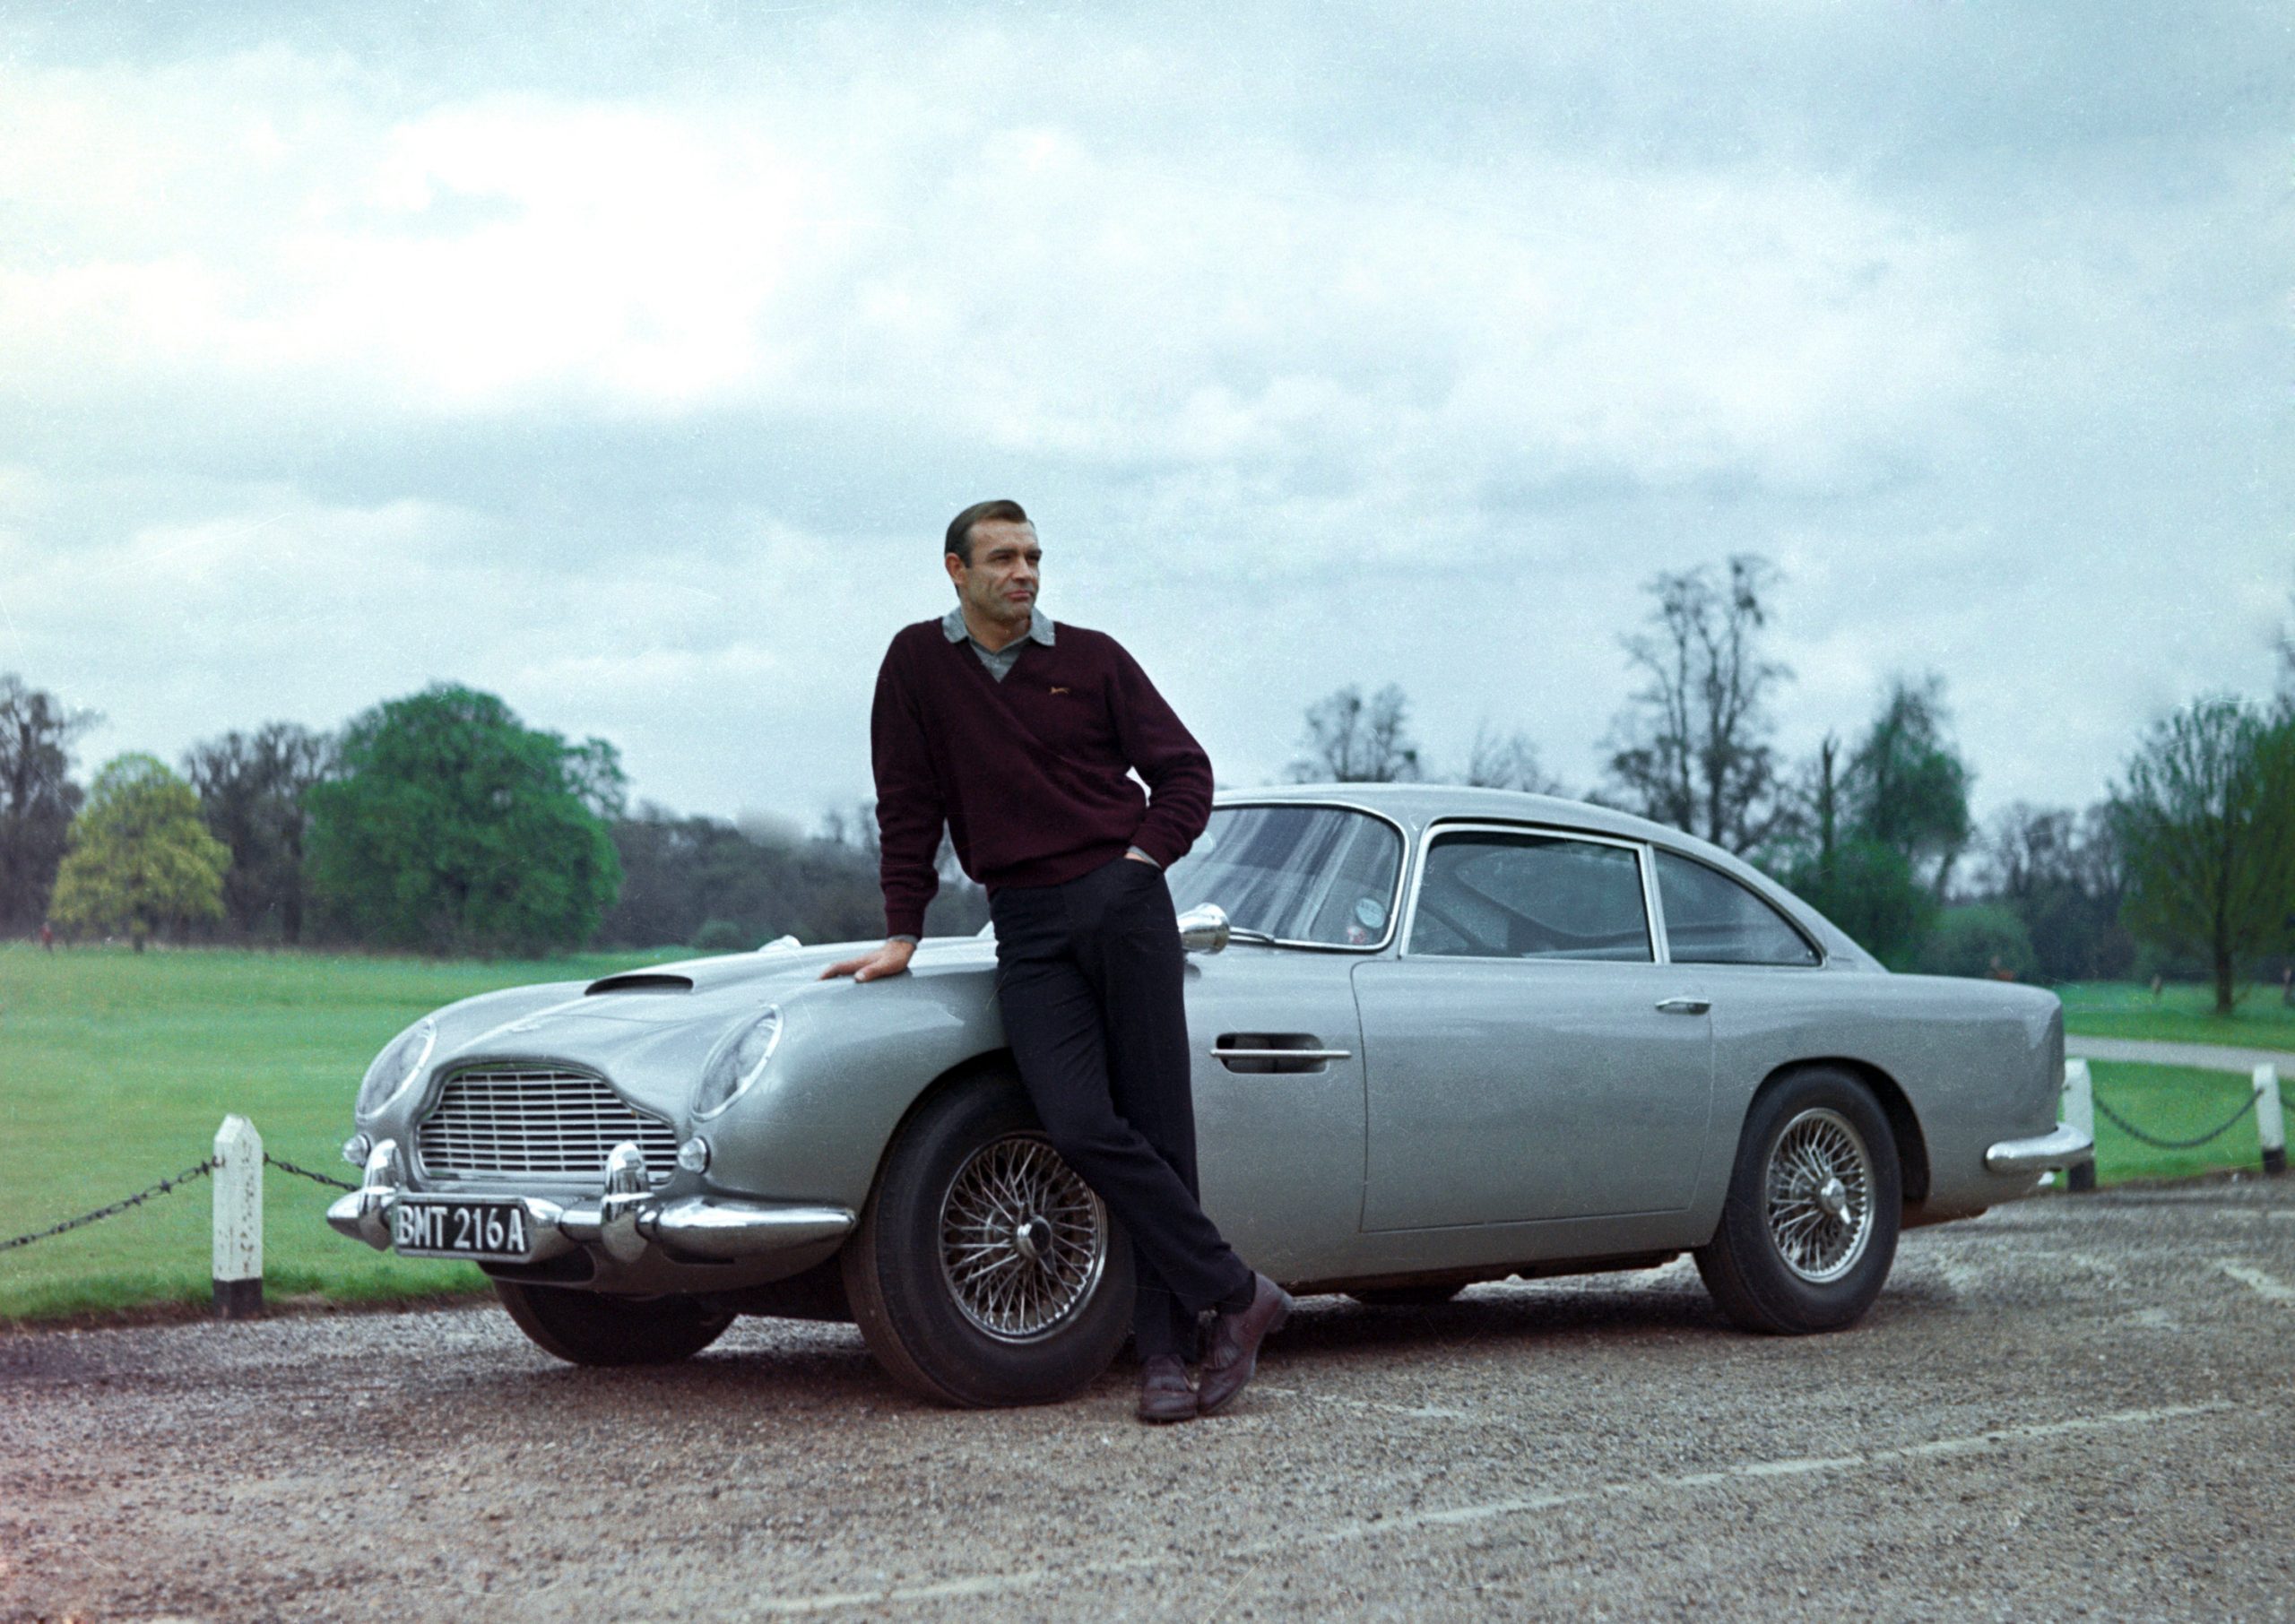 Sean Connery in Goldfinger, which introduced the Aston Martin DB5 as a popular Bond car